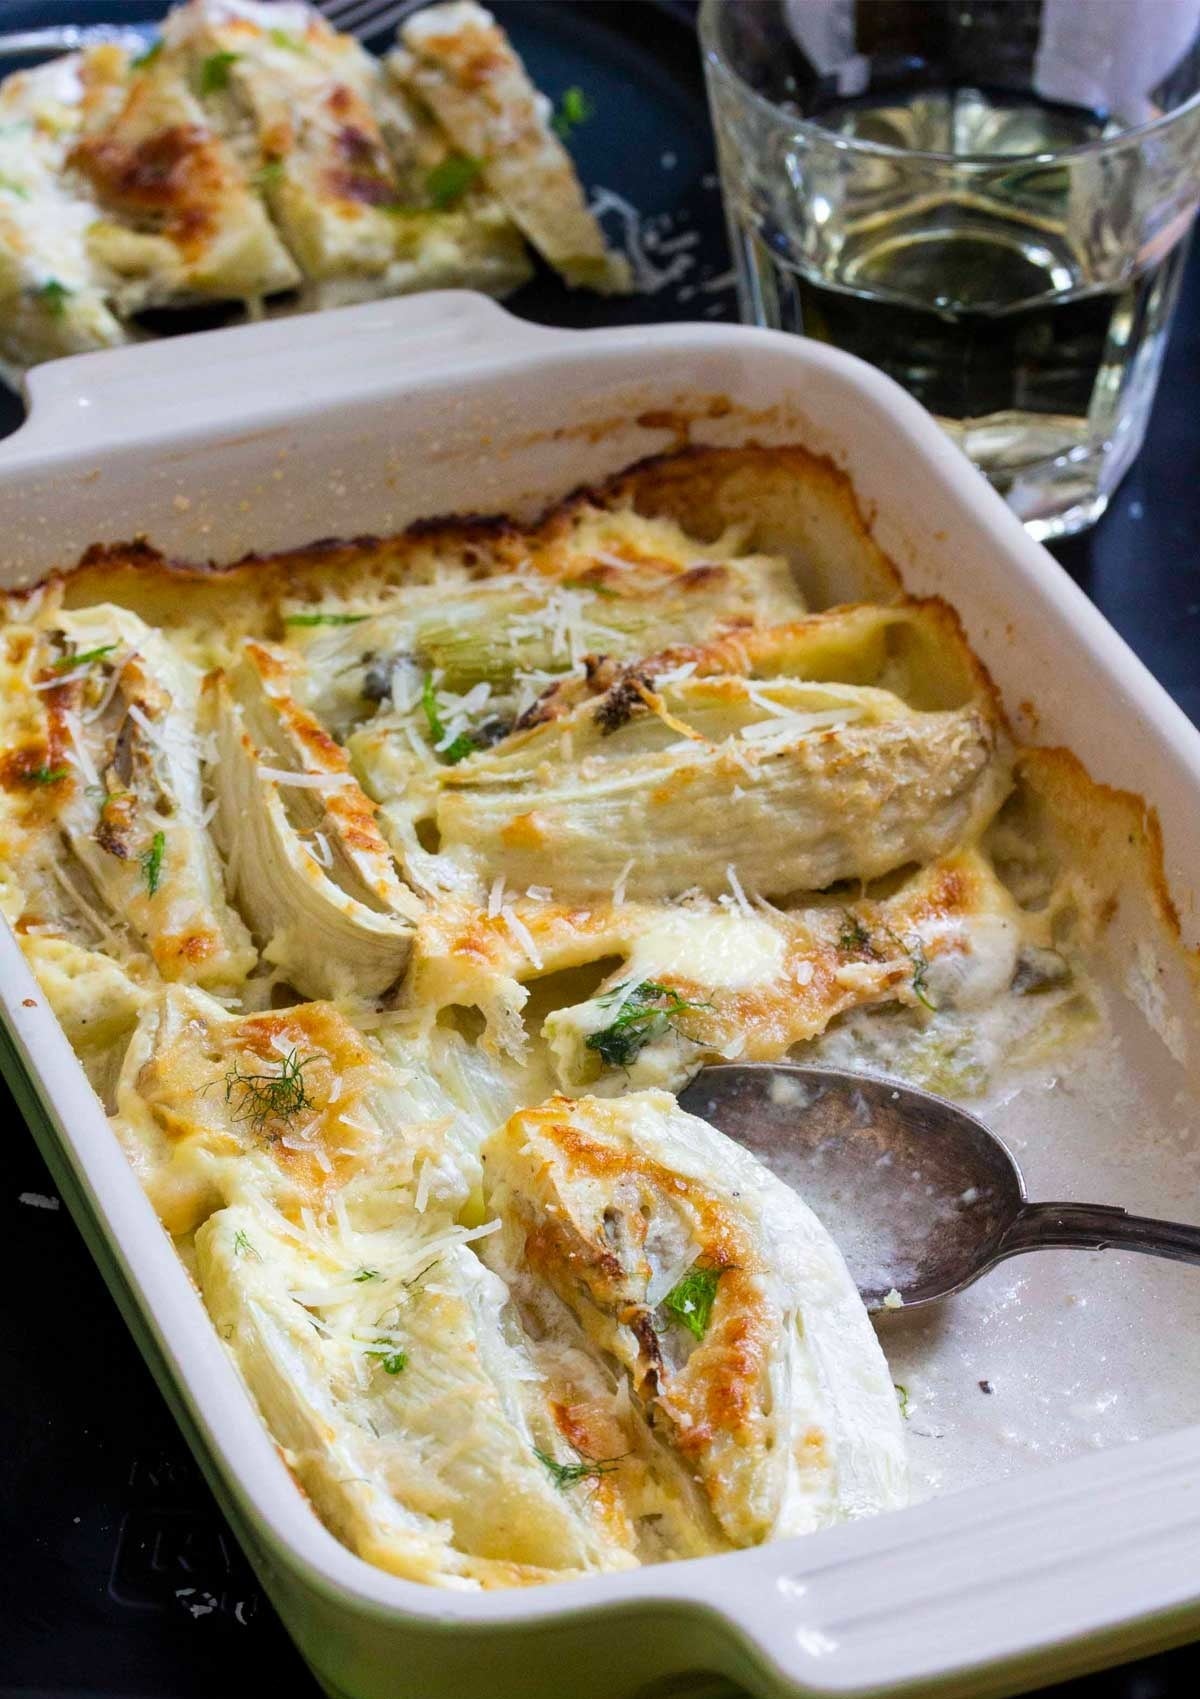 A spoon taking a scoop from a baking pan filled with creamy baked fennel.